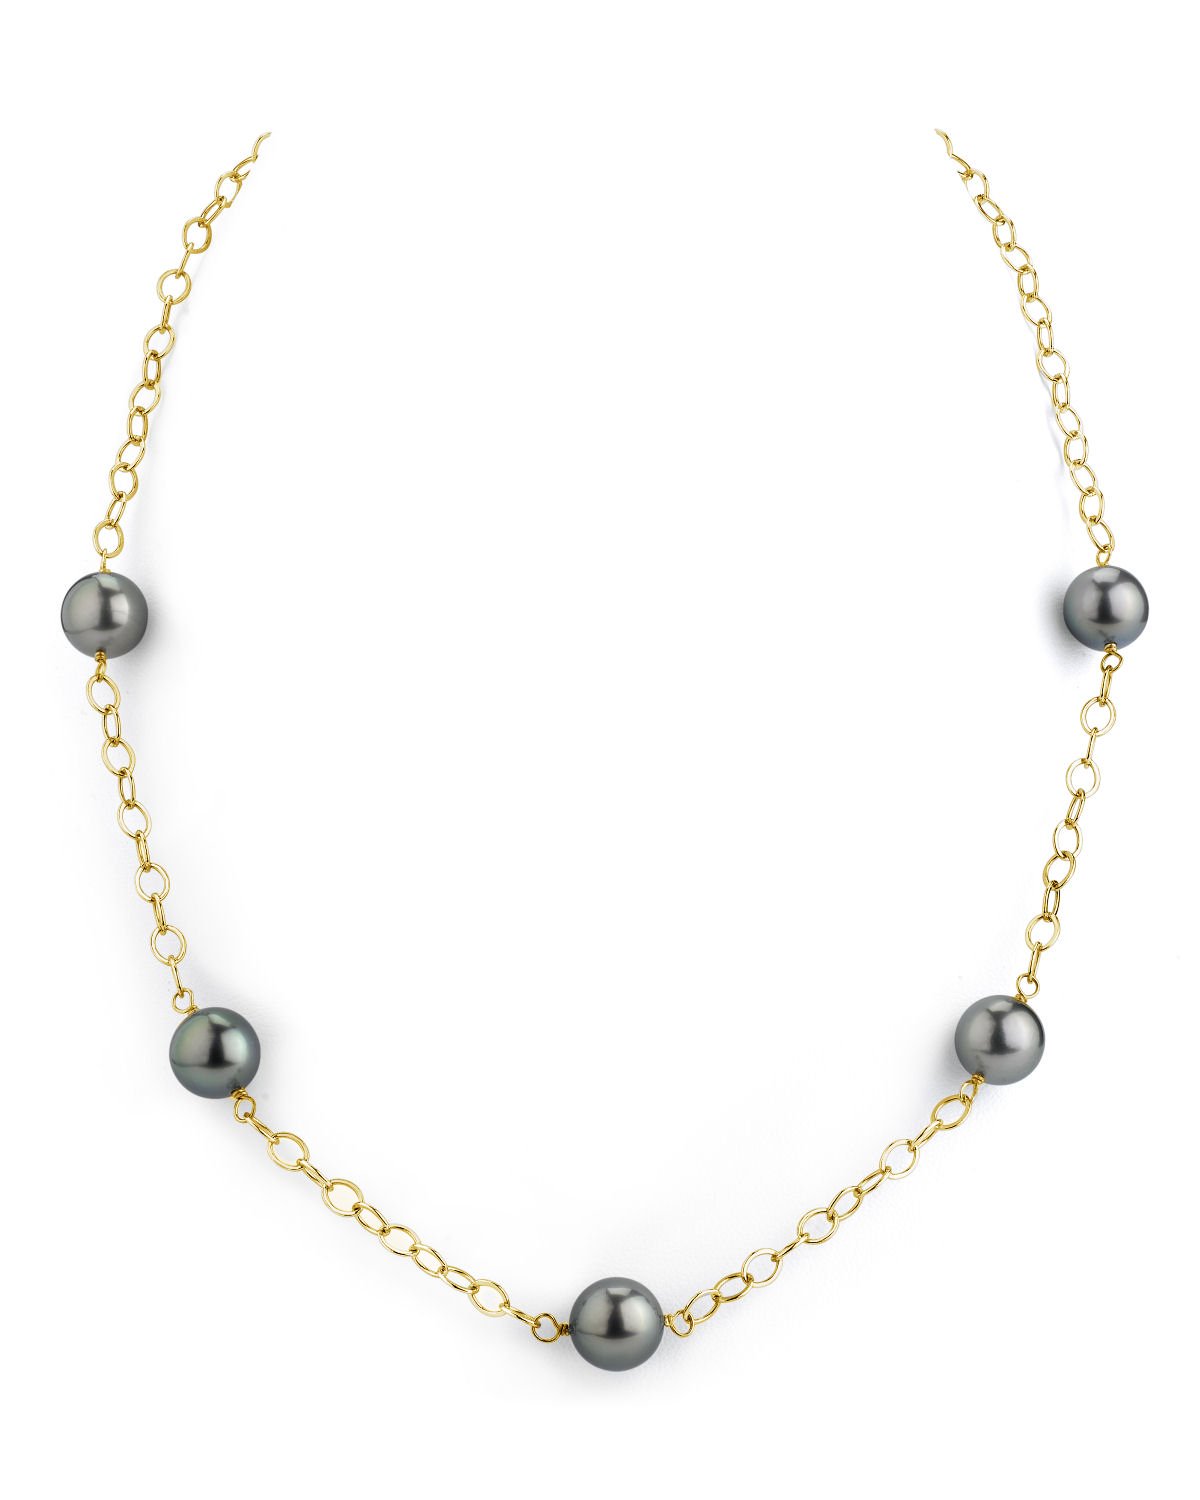 Tahitian South Sea Round Pearl Tincup Necklace - Model Image